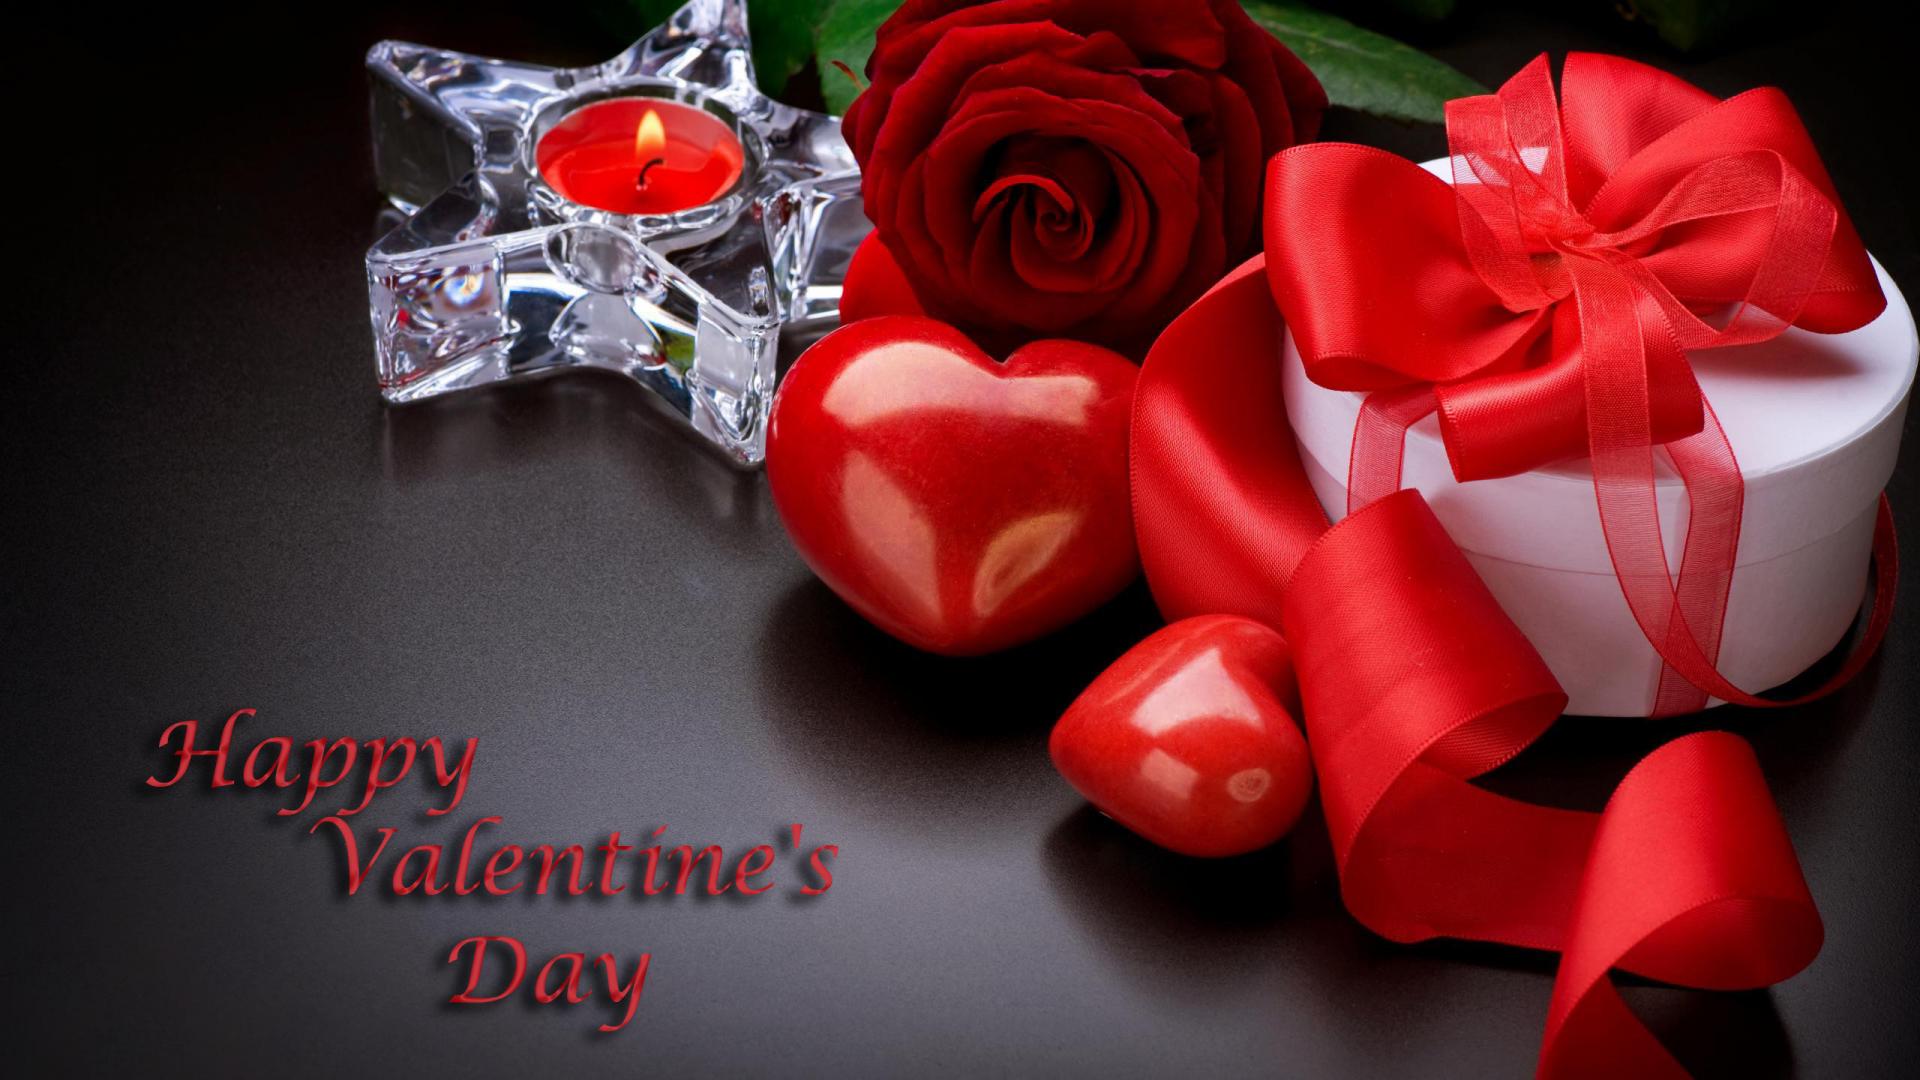 Happy Valentine’s Day HD Images